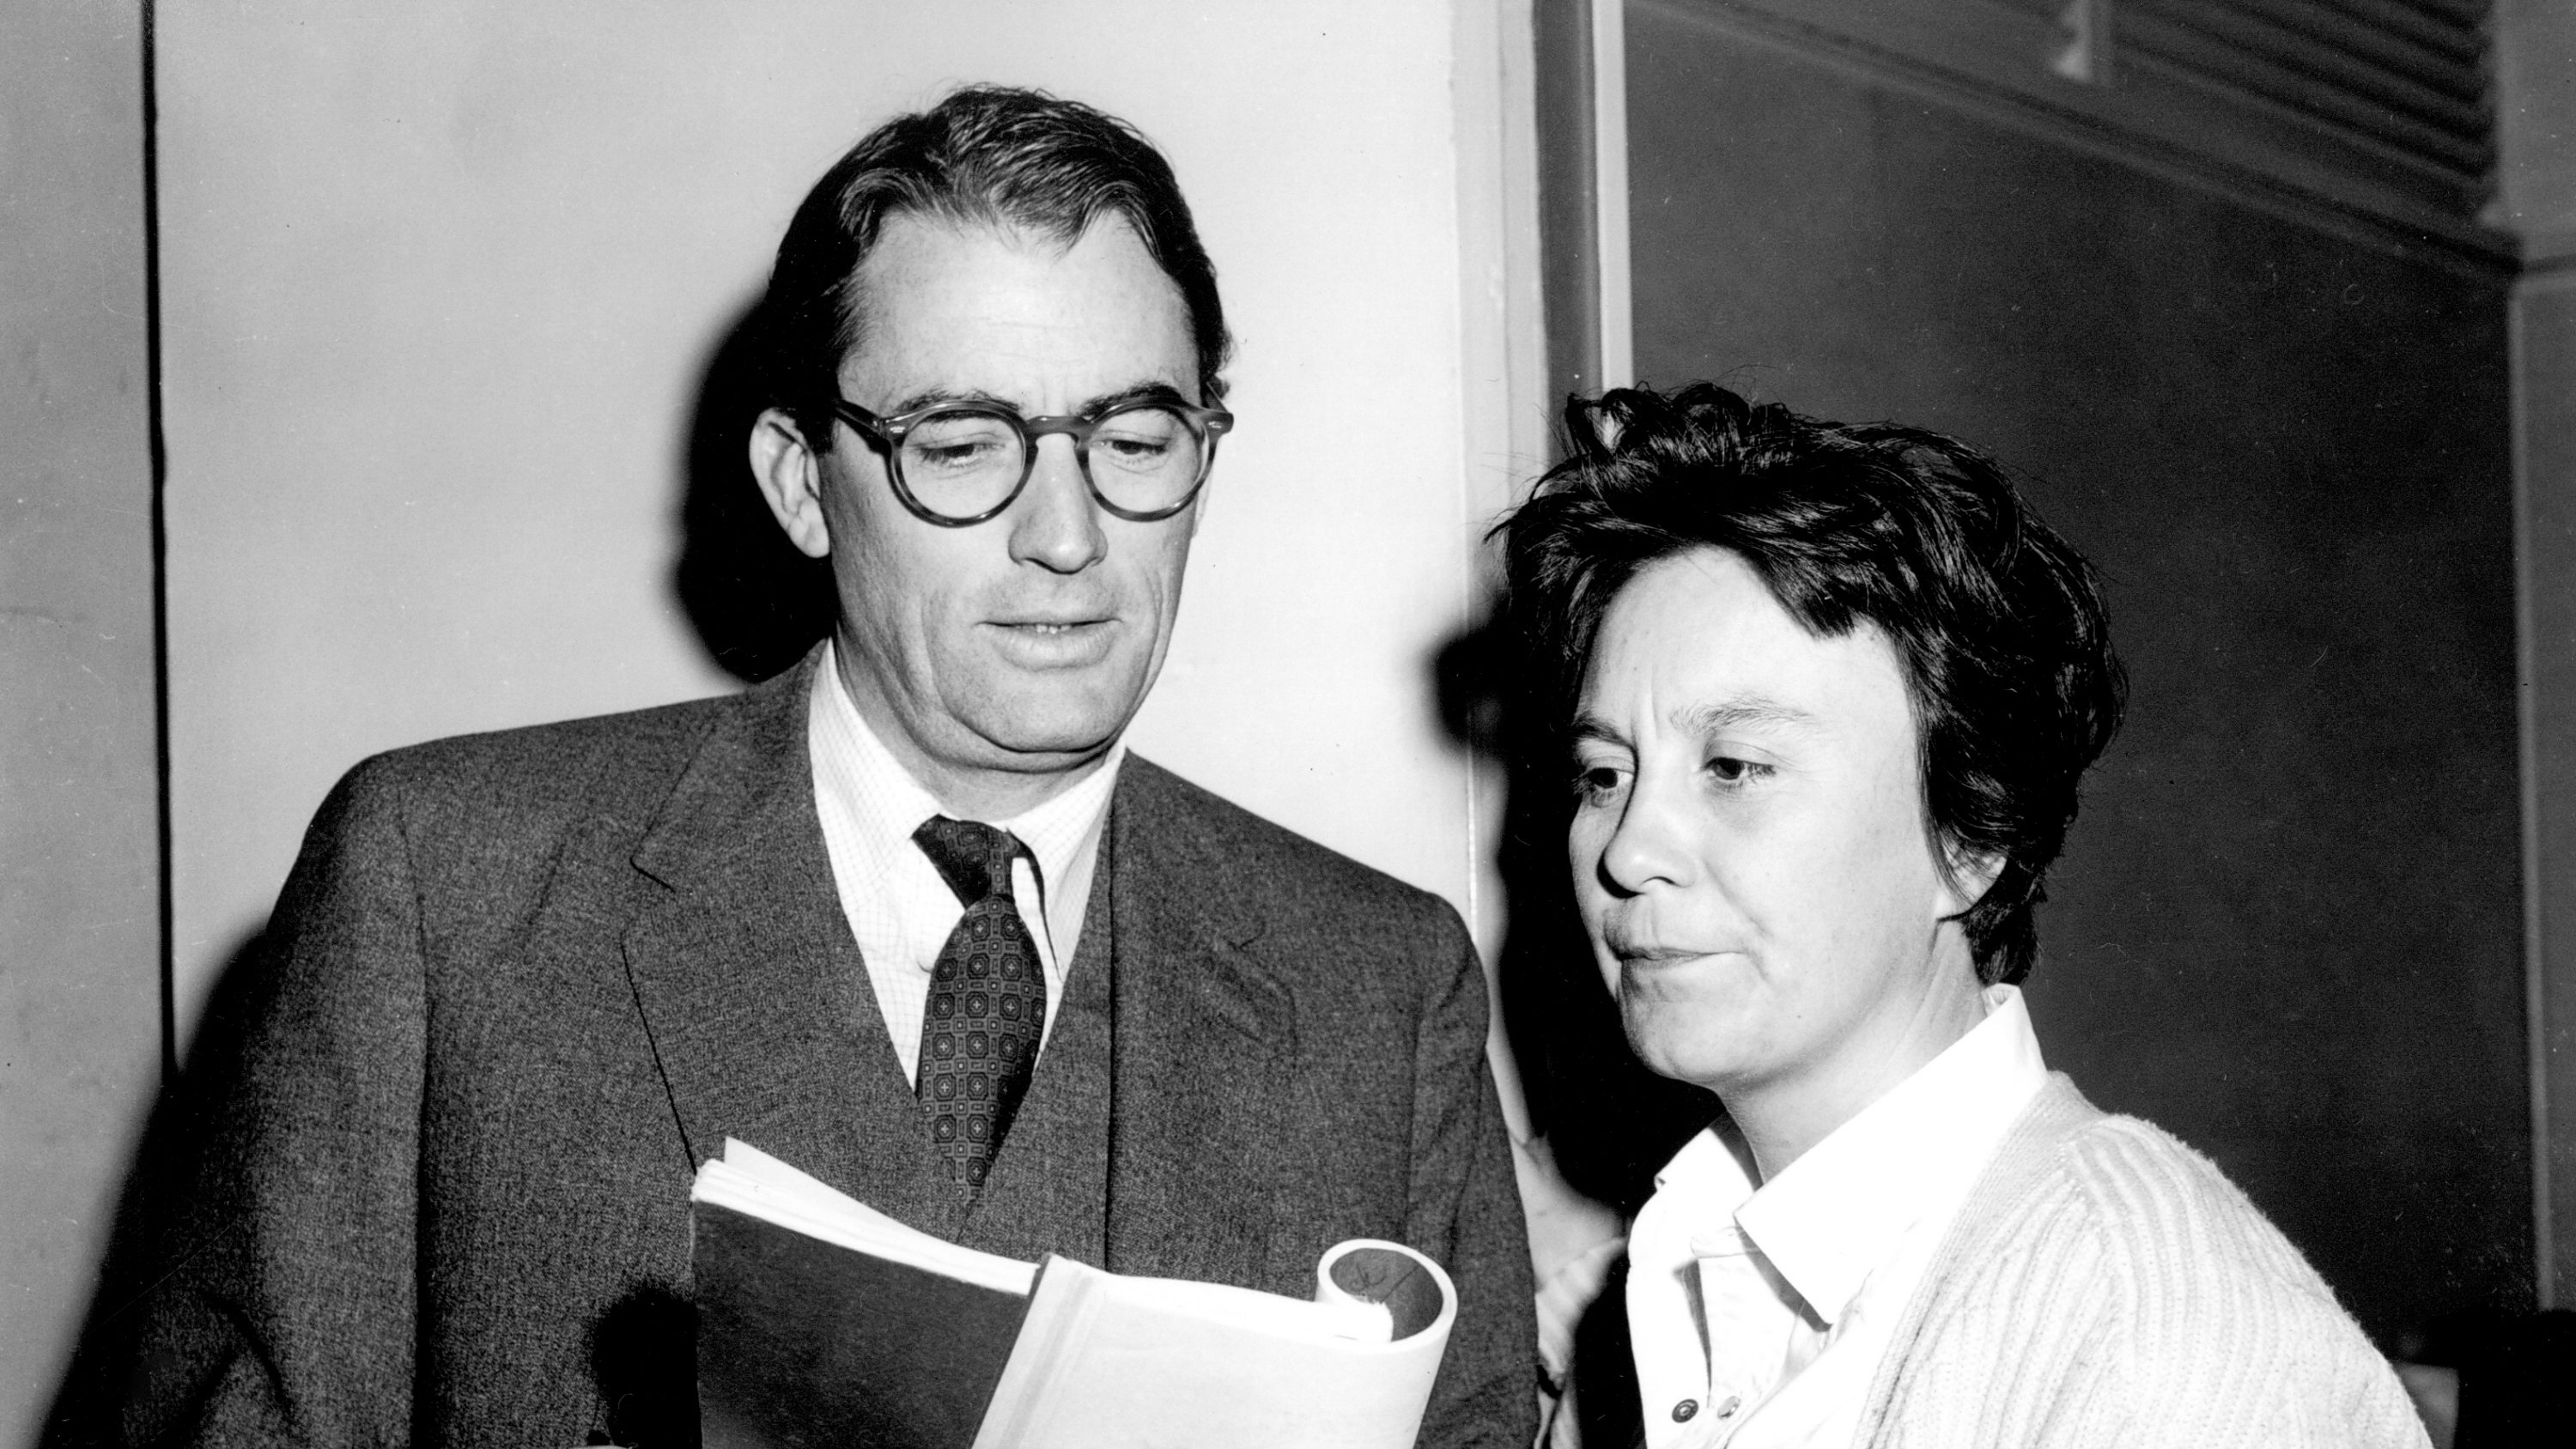 3000x1688 Harper Lee's Estate Sues Over Broadway Version of 'Mockingbird' The New York Times